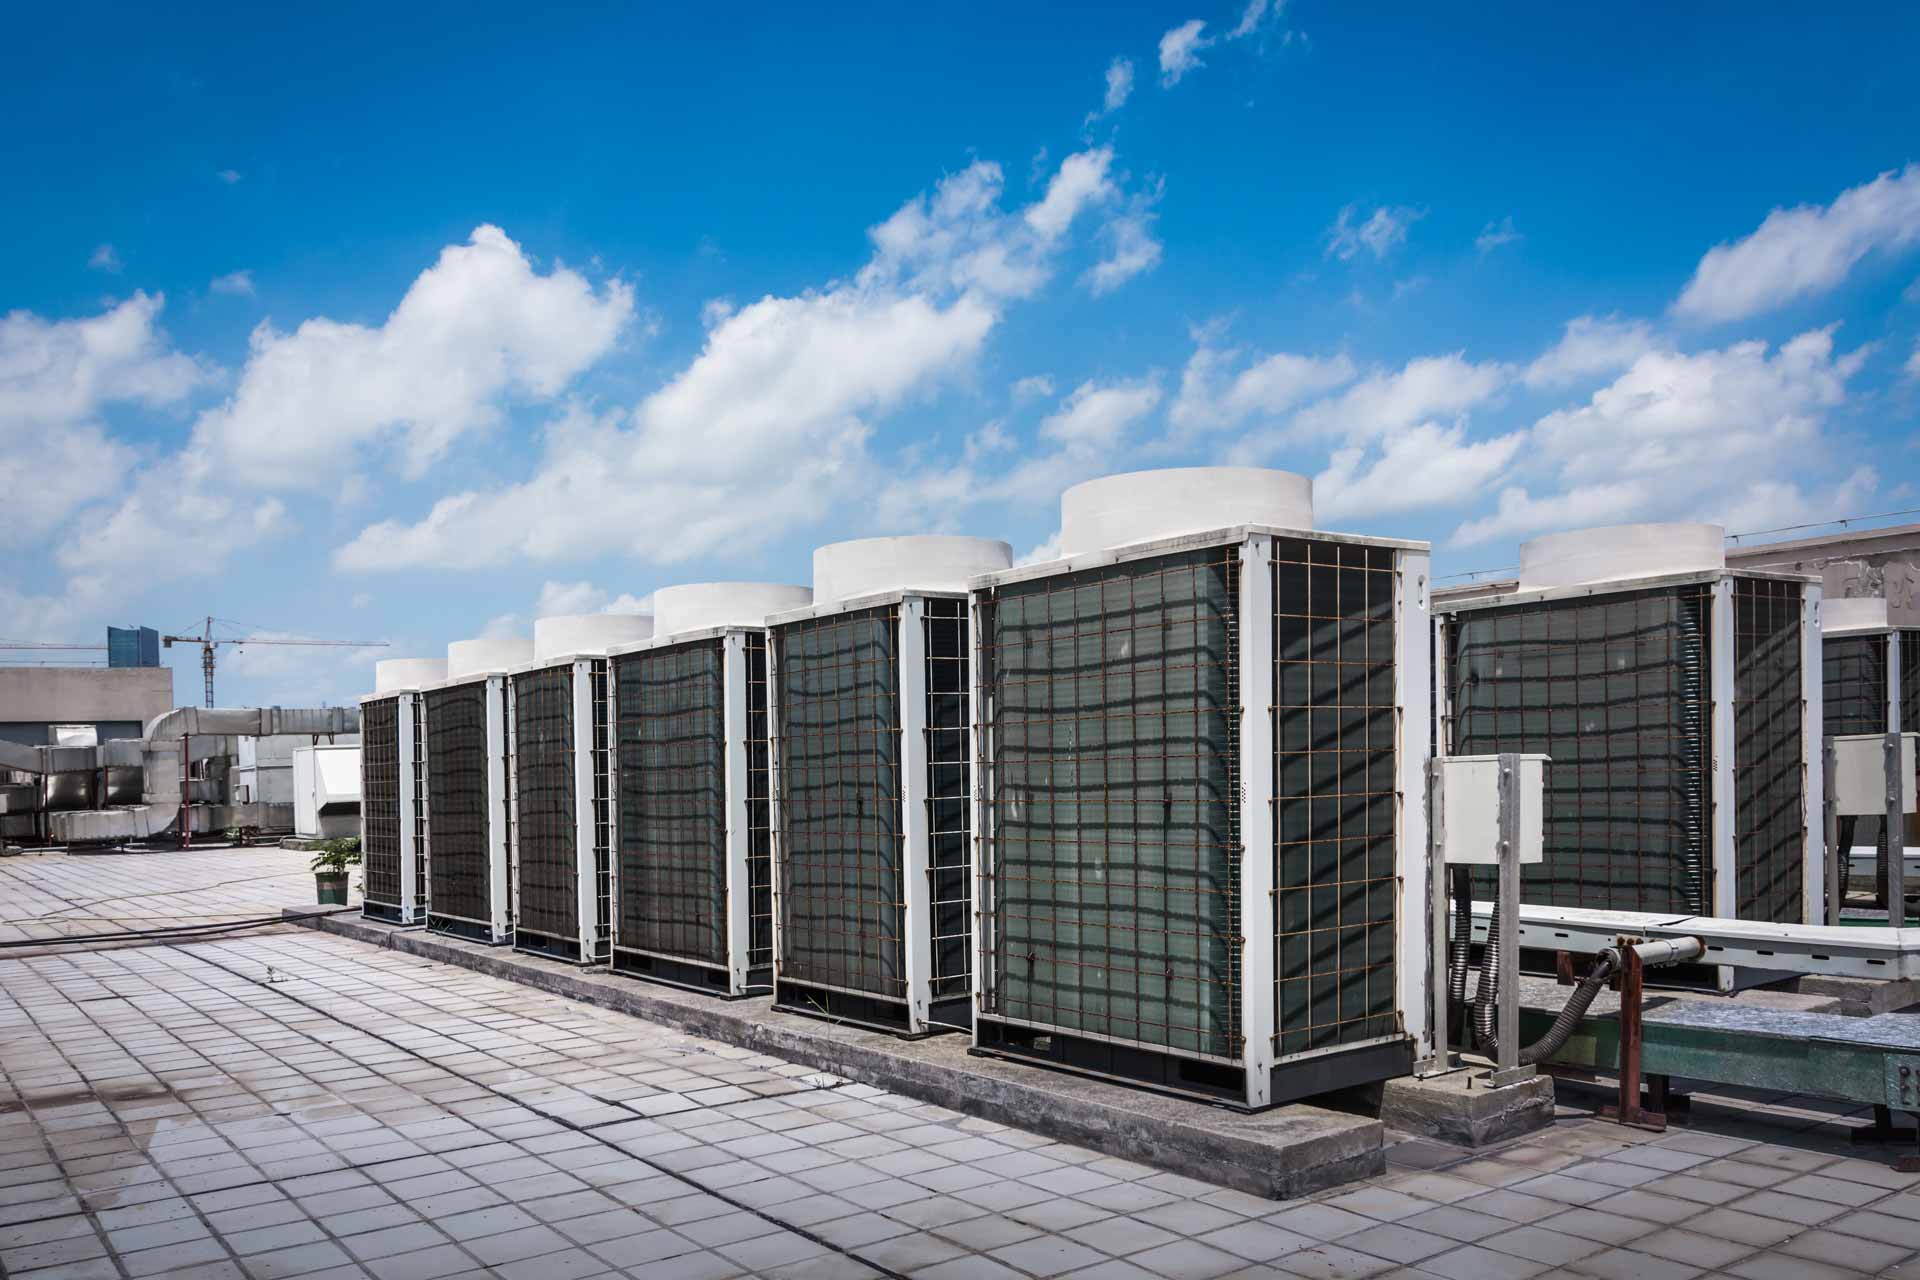 Rooftop of building with commercial AC units